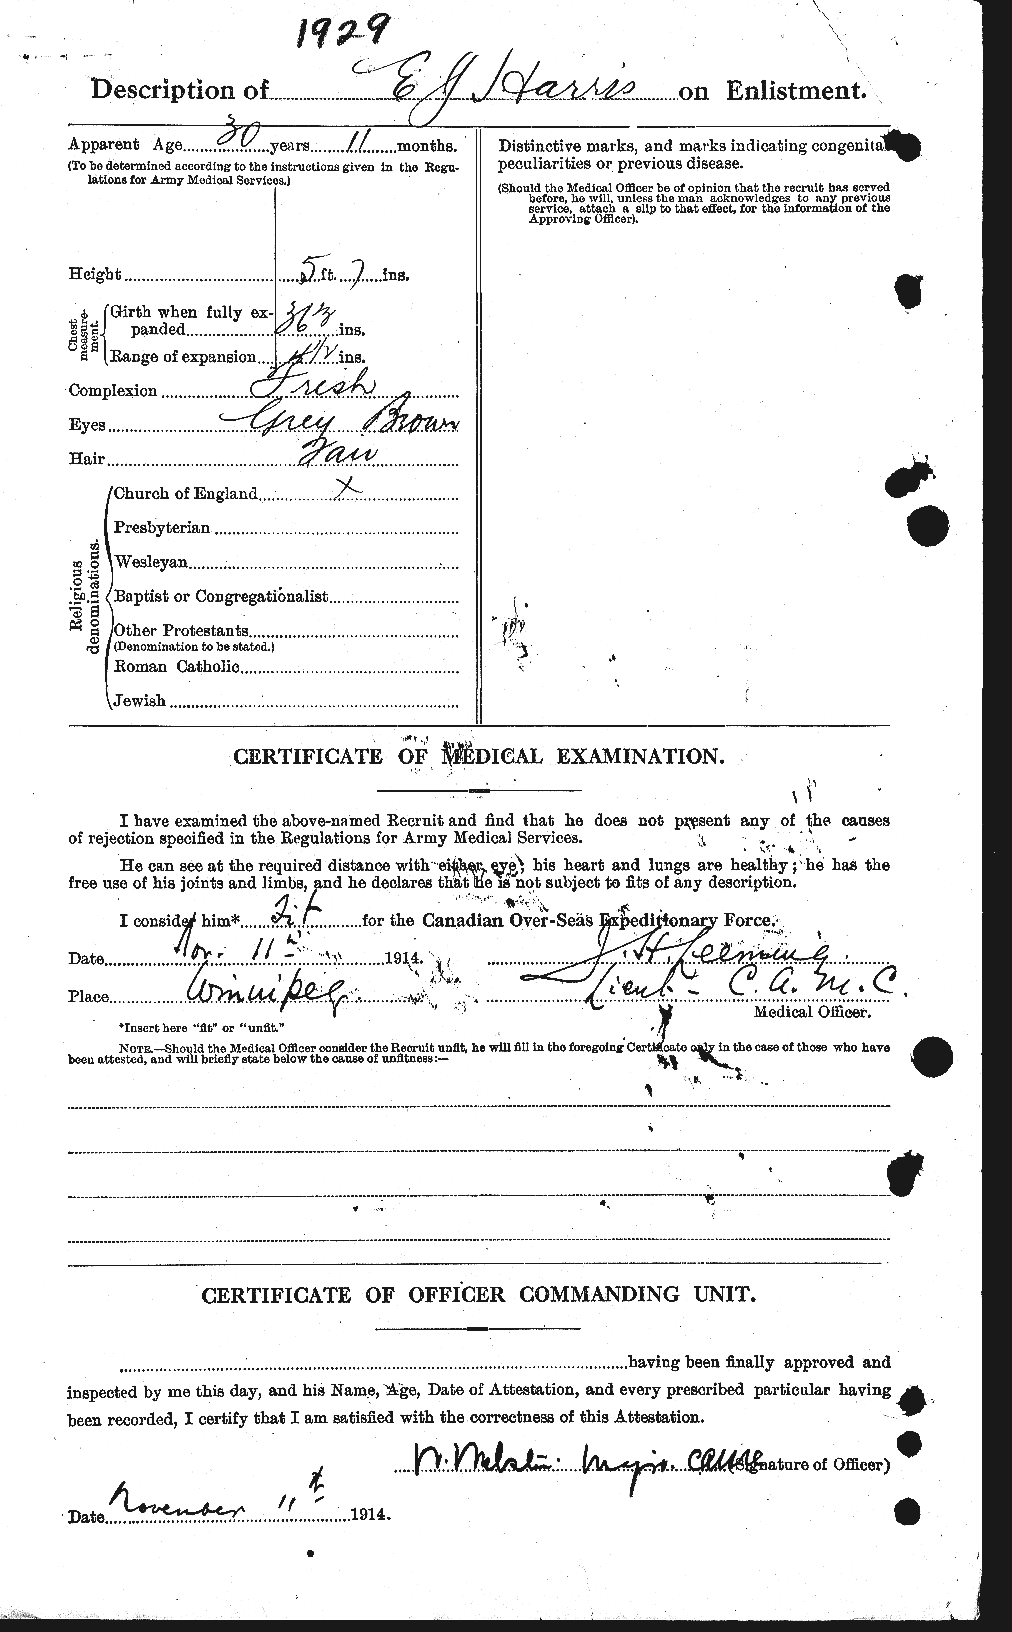 Personnel Records of the First World War - CEF 379275b